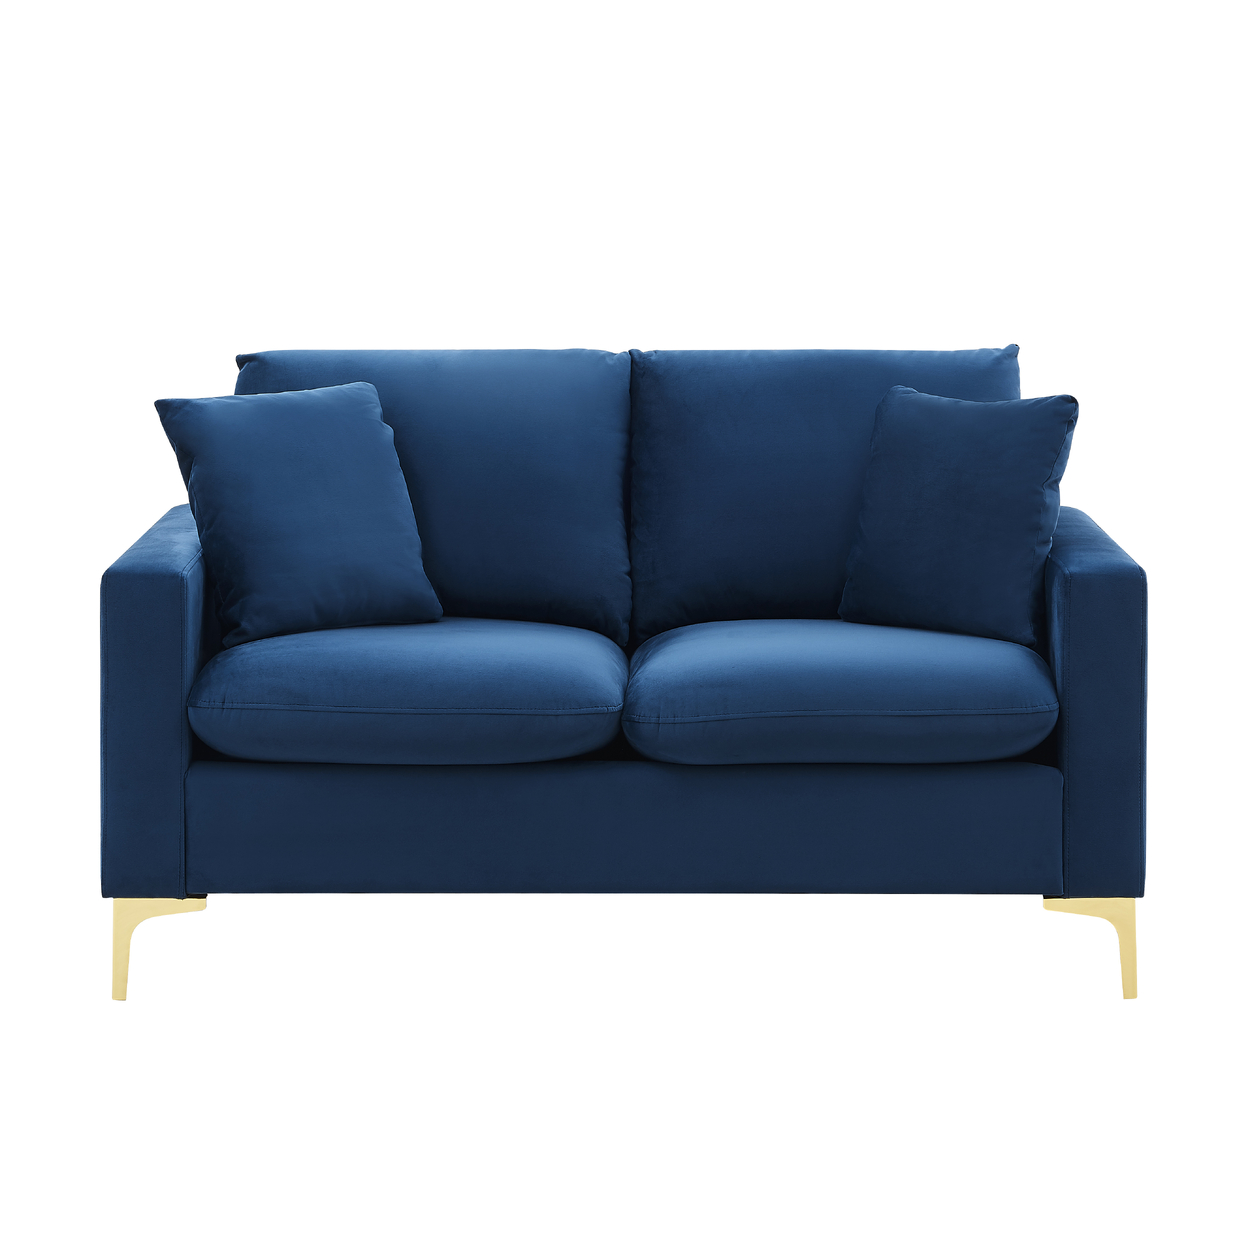 Iconic Home Roxi Loveseat Velvet Upholstered Multi-Cushion Seat Gold Tone Metal Y-Legs With 2 Decorative Pillows - Blue